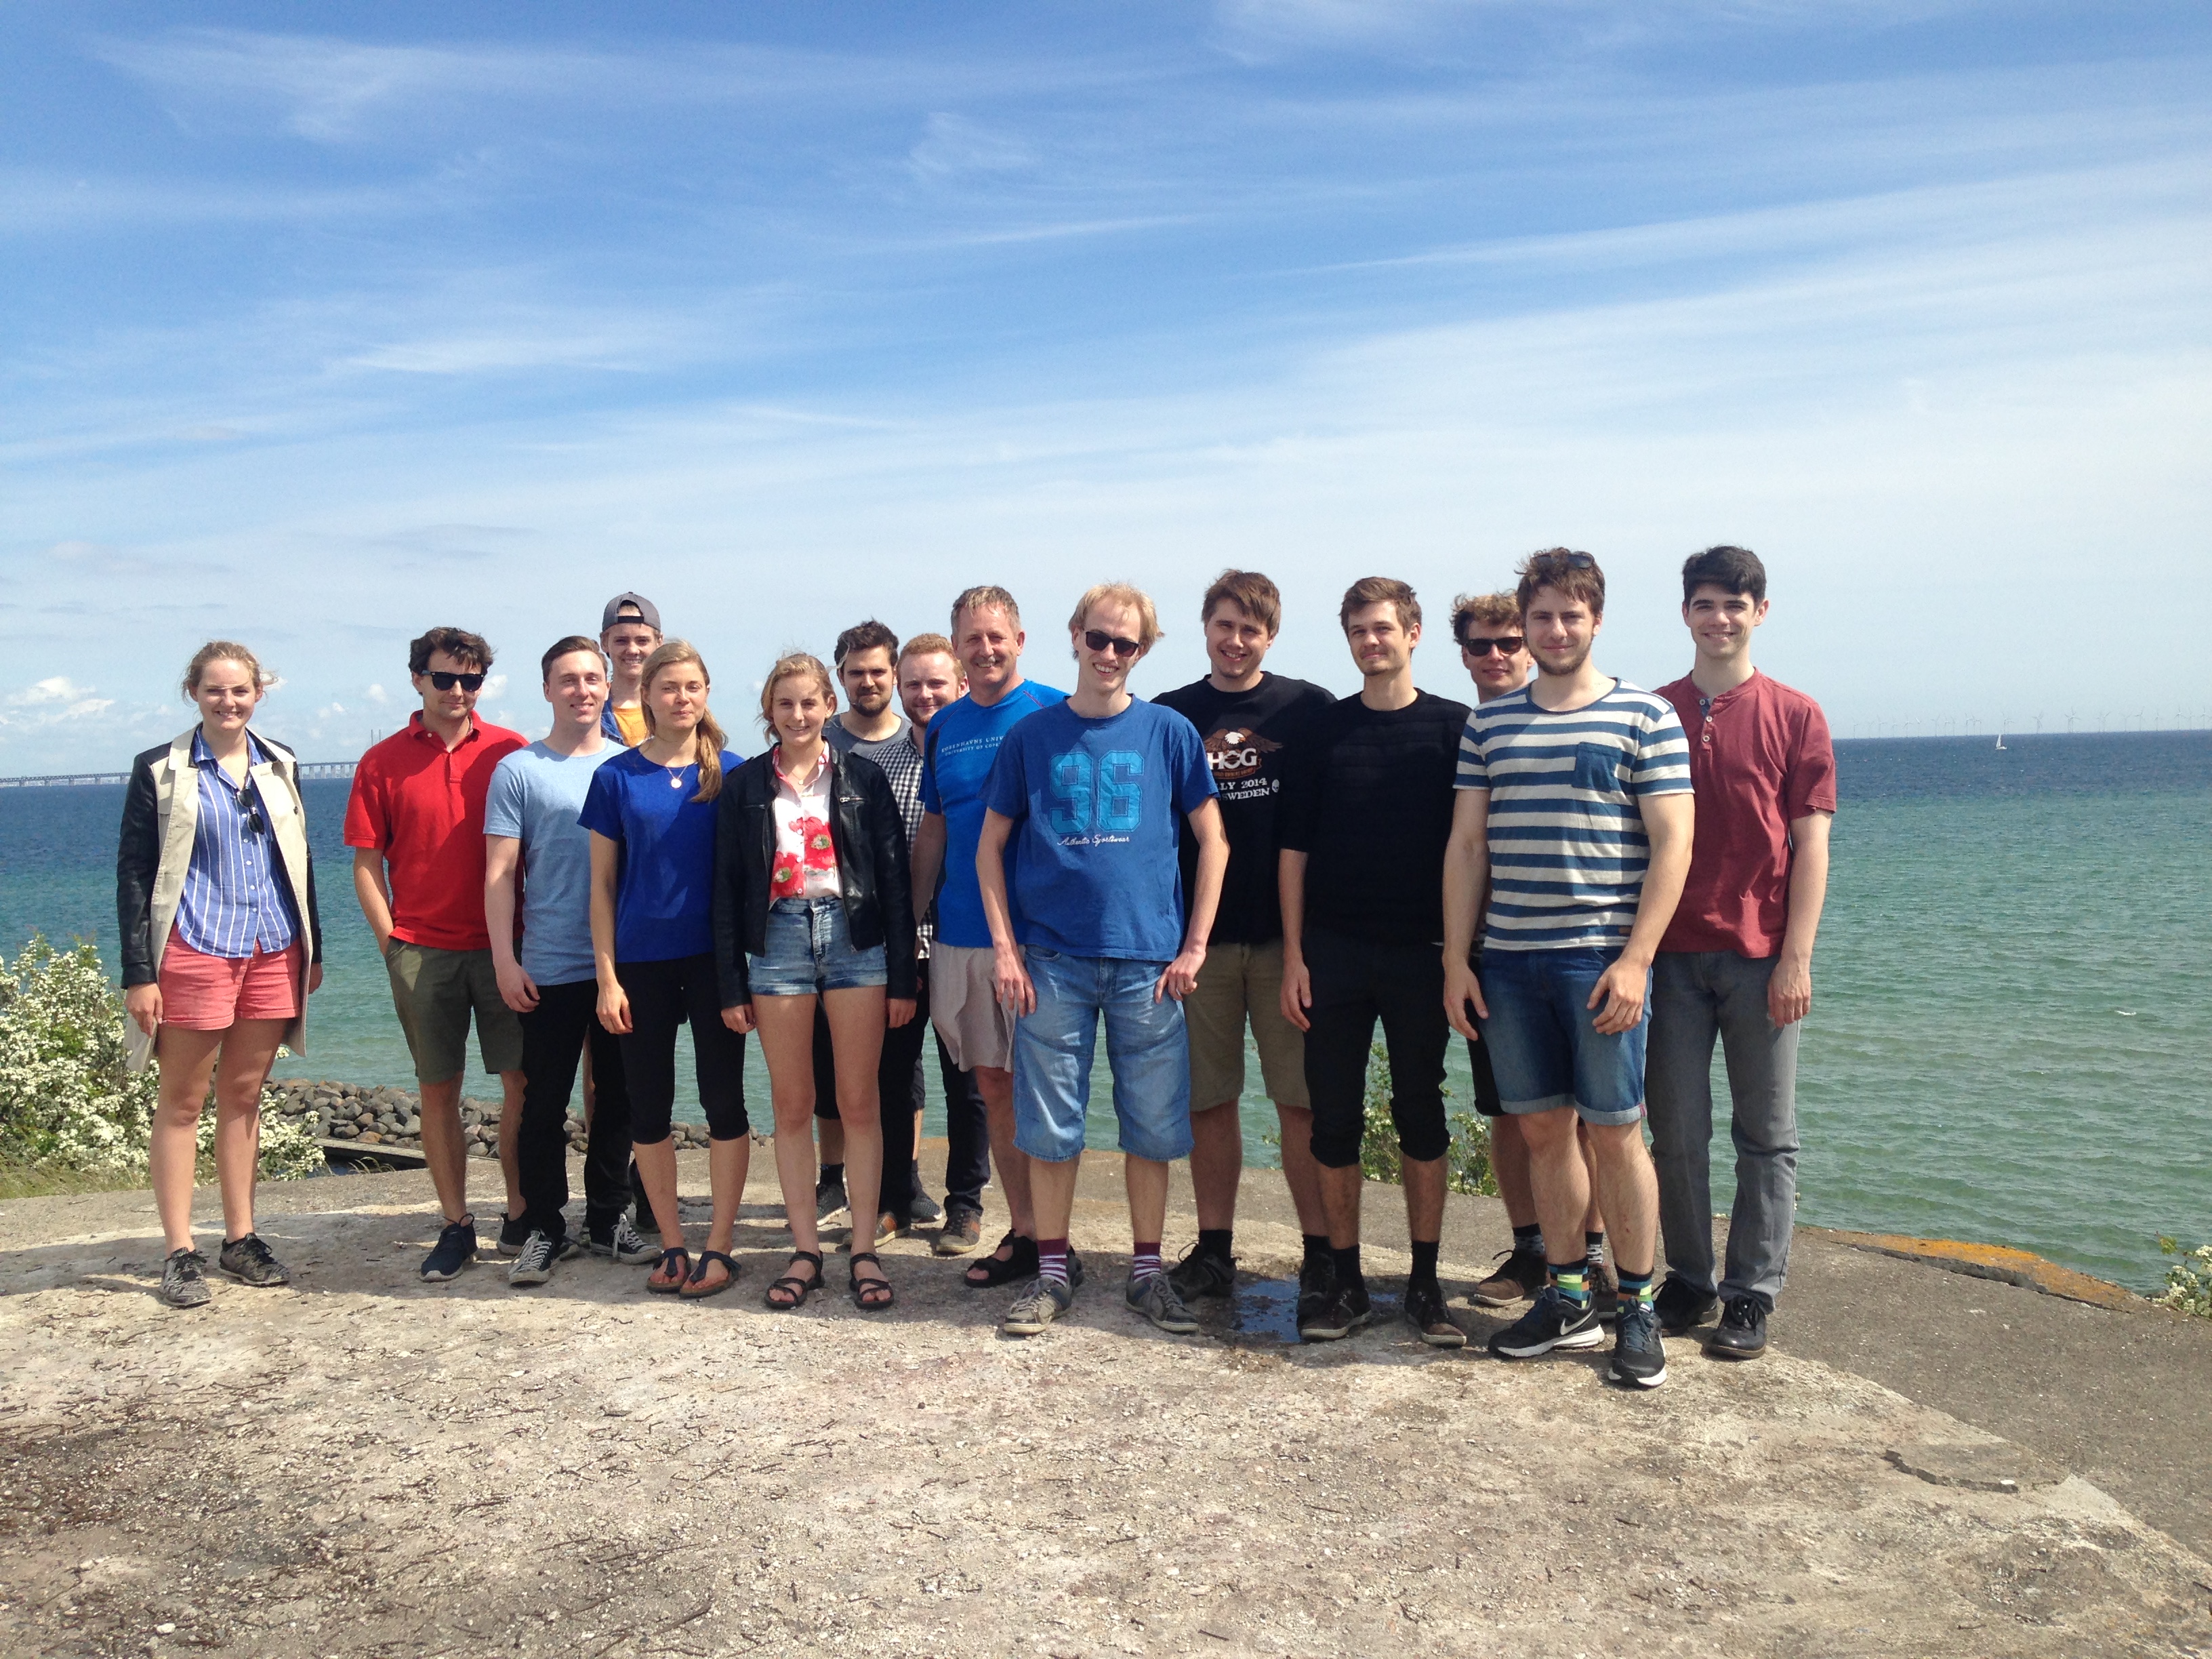 The group at the annual summer BBQ, standing at Dragør Fortress, 2017.